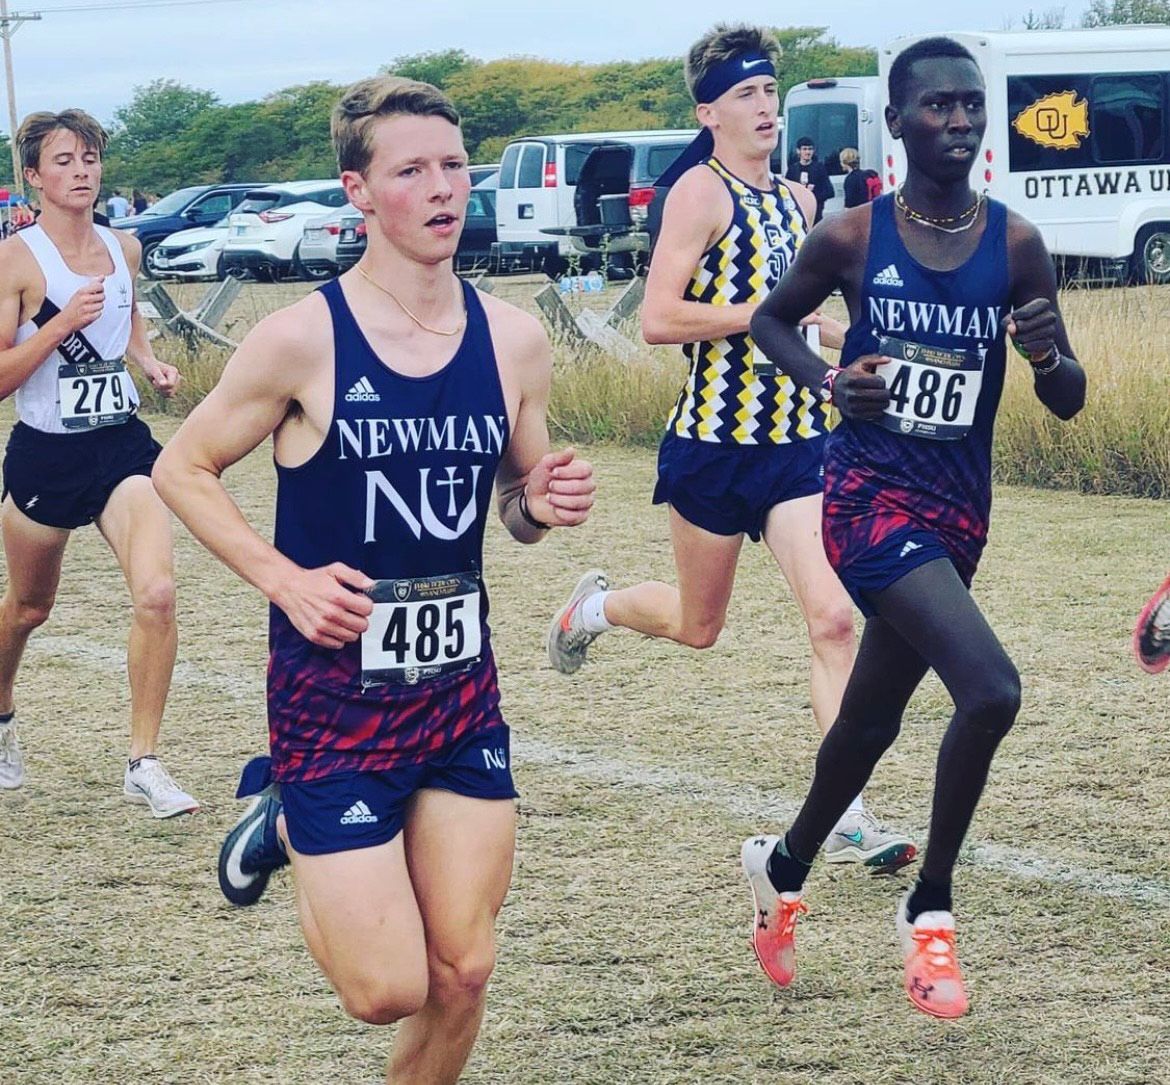 Cross country freshman breaking records early